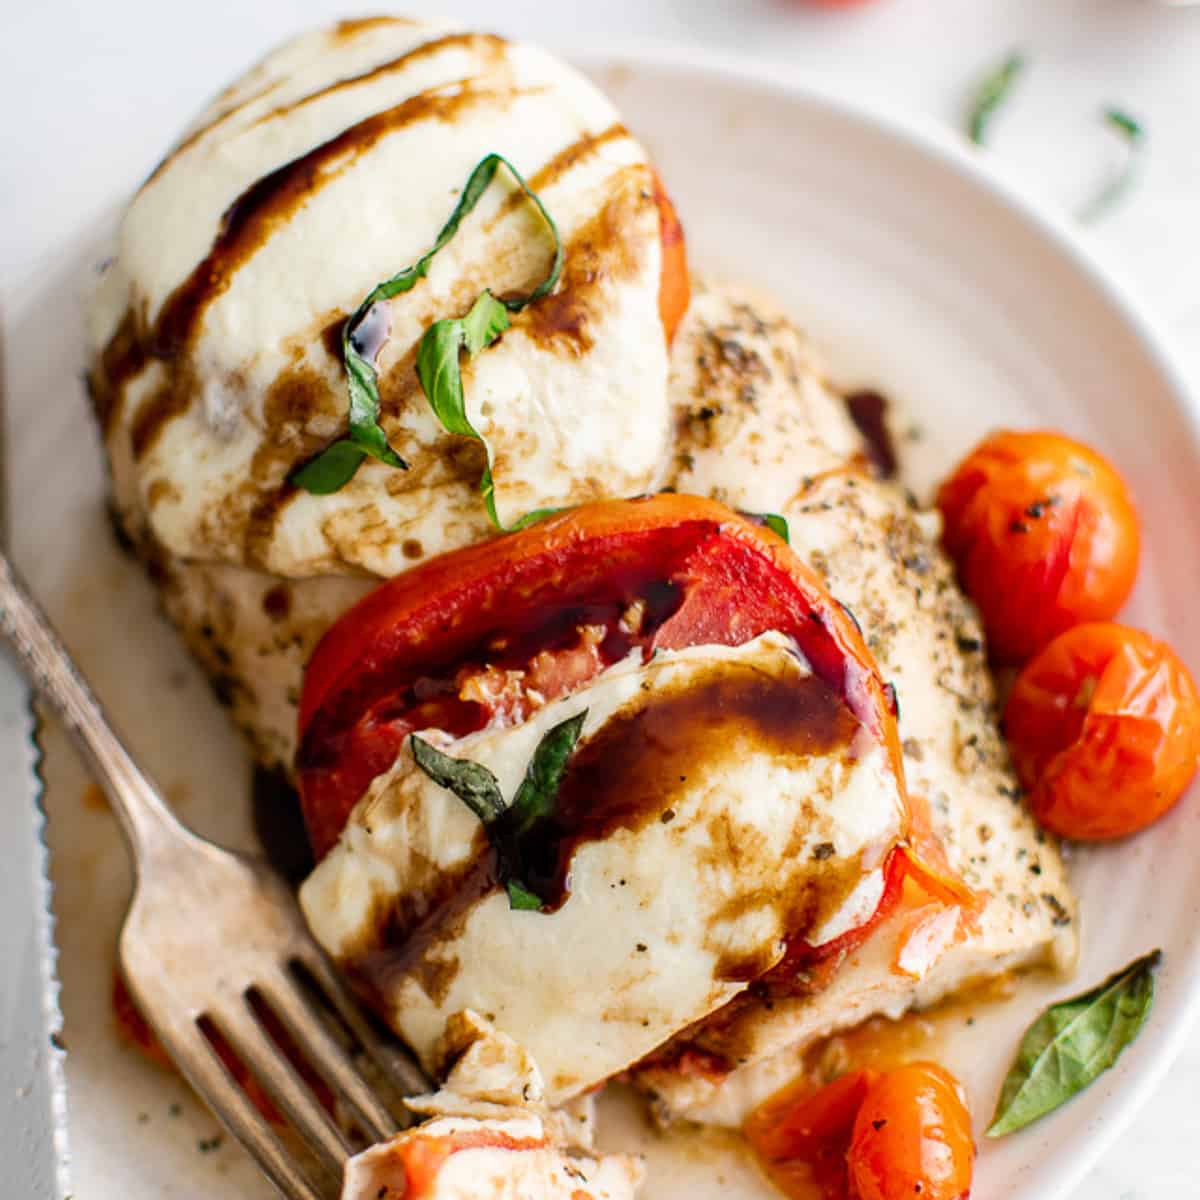 Chicken with mozzarella and tomatoes.